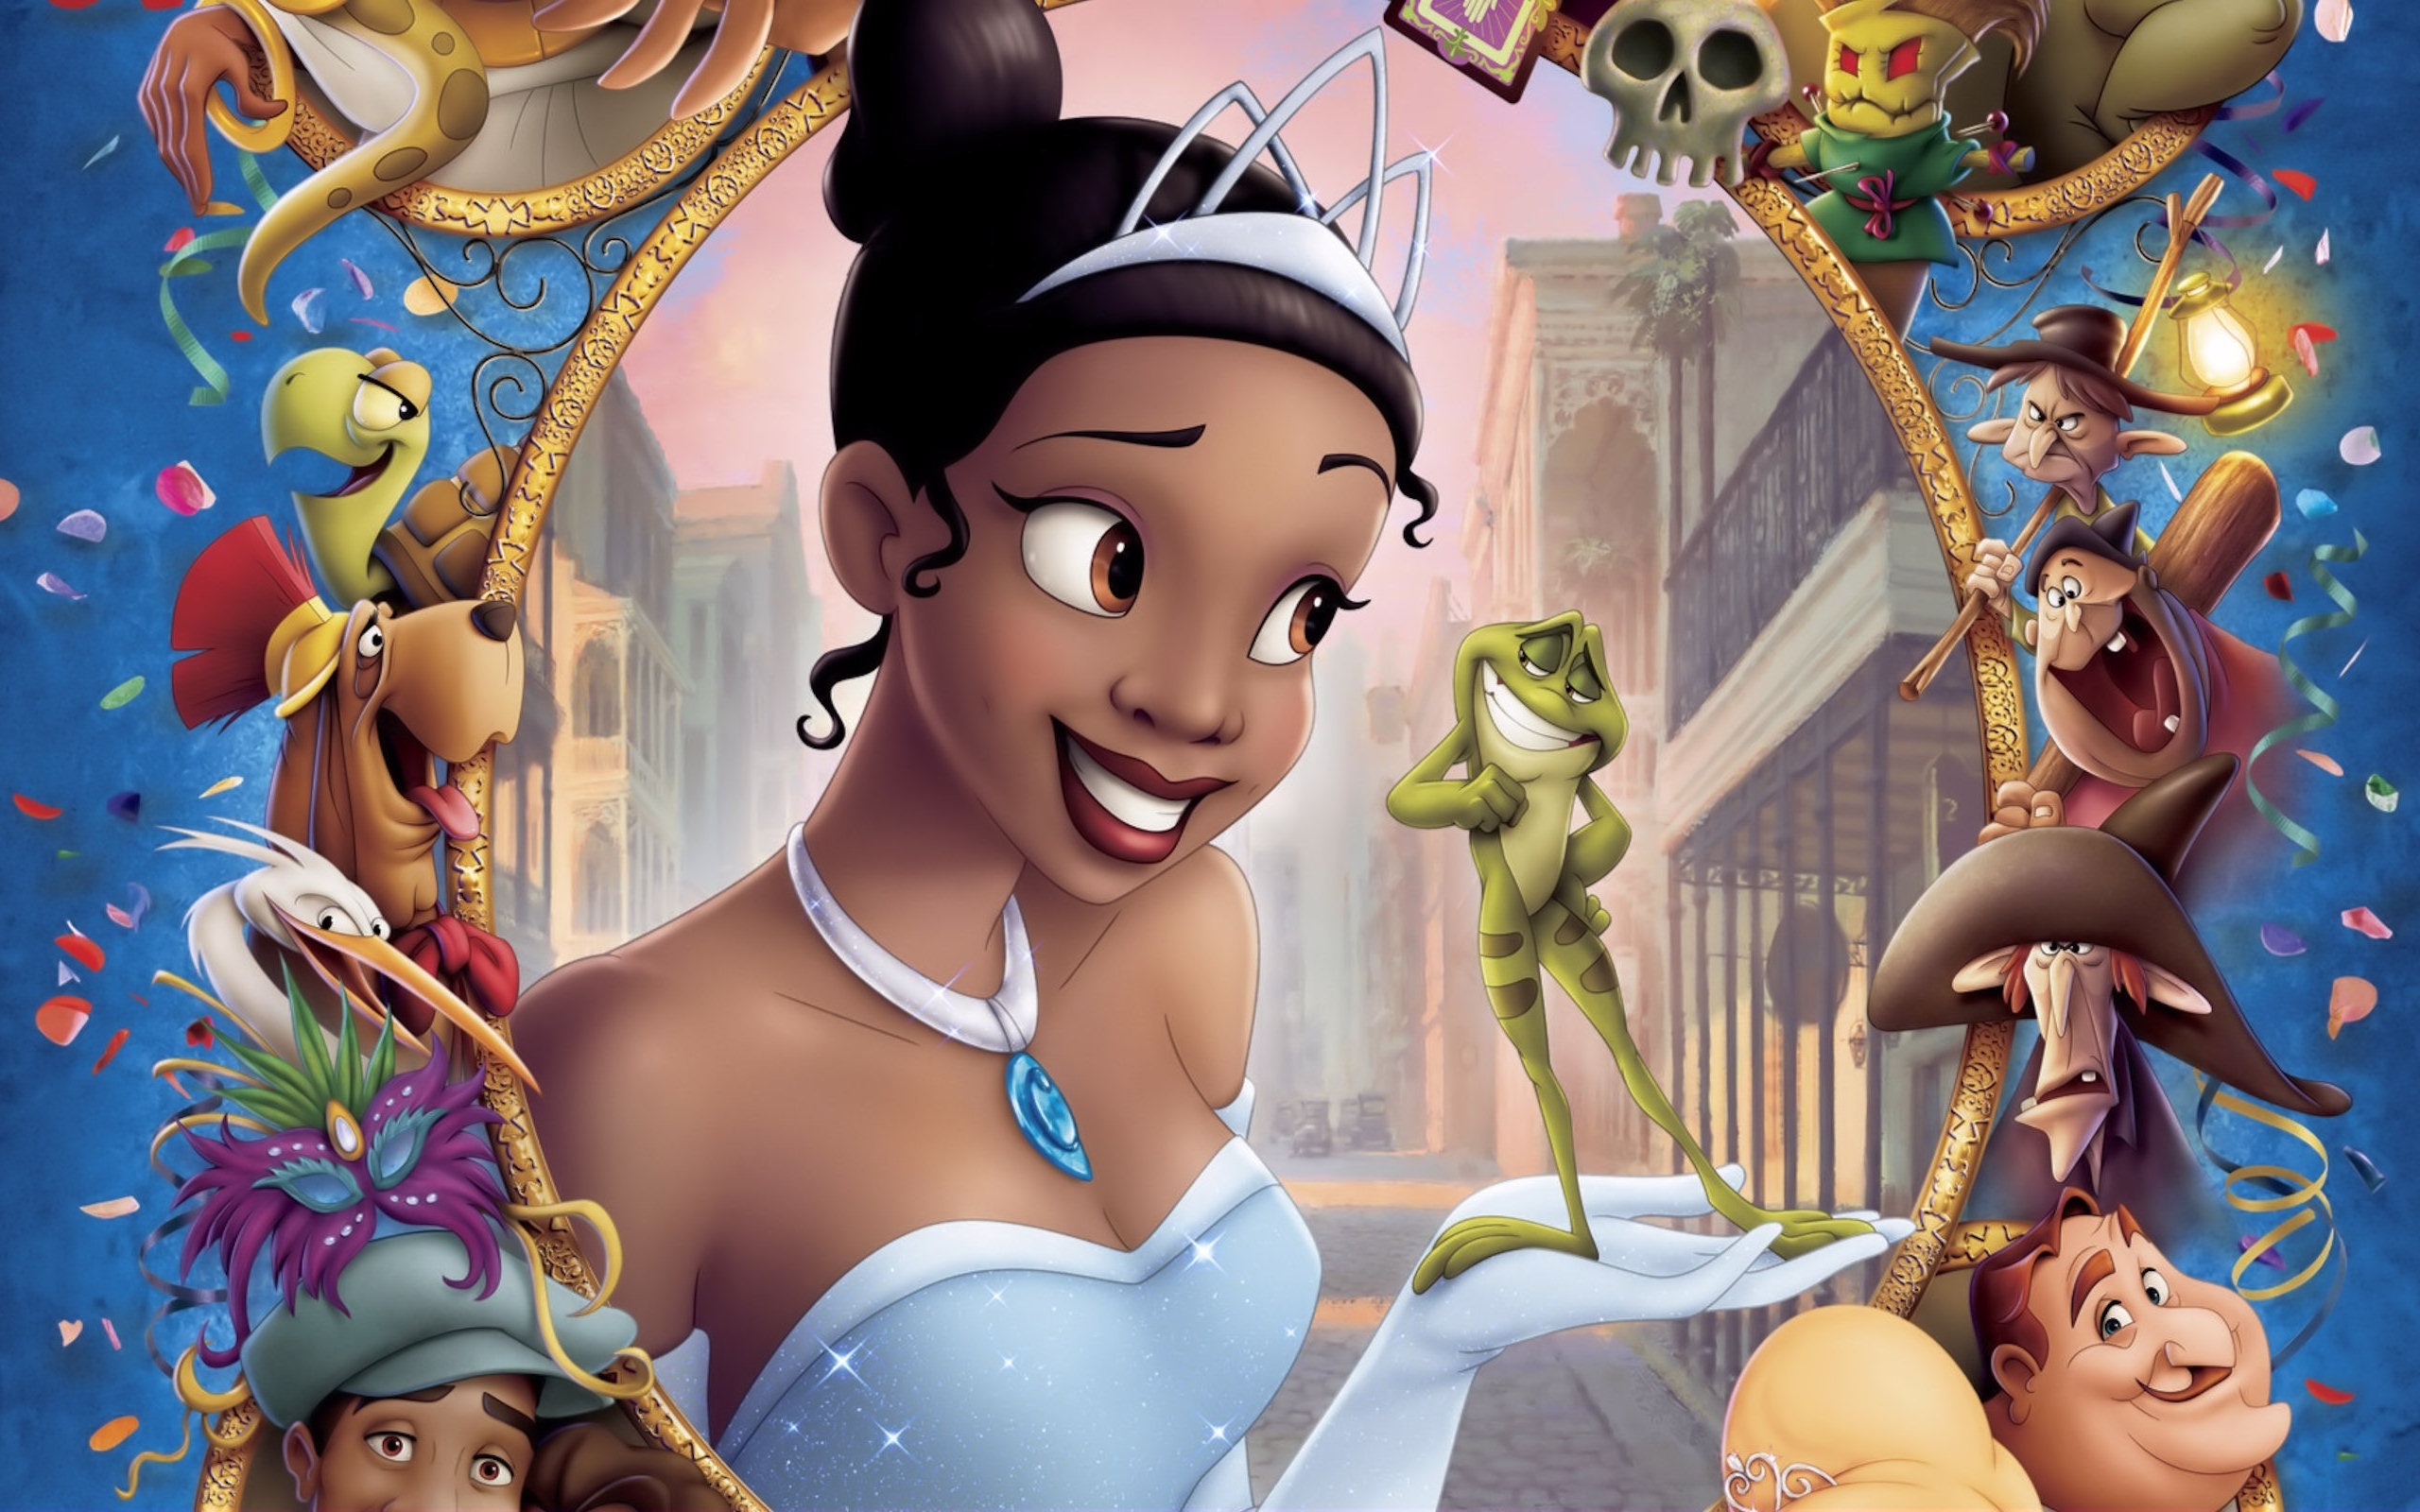 Tiana, the main character from The Princess and the Frog, in a high definition desktop wallpaper.